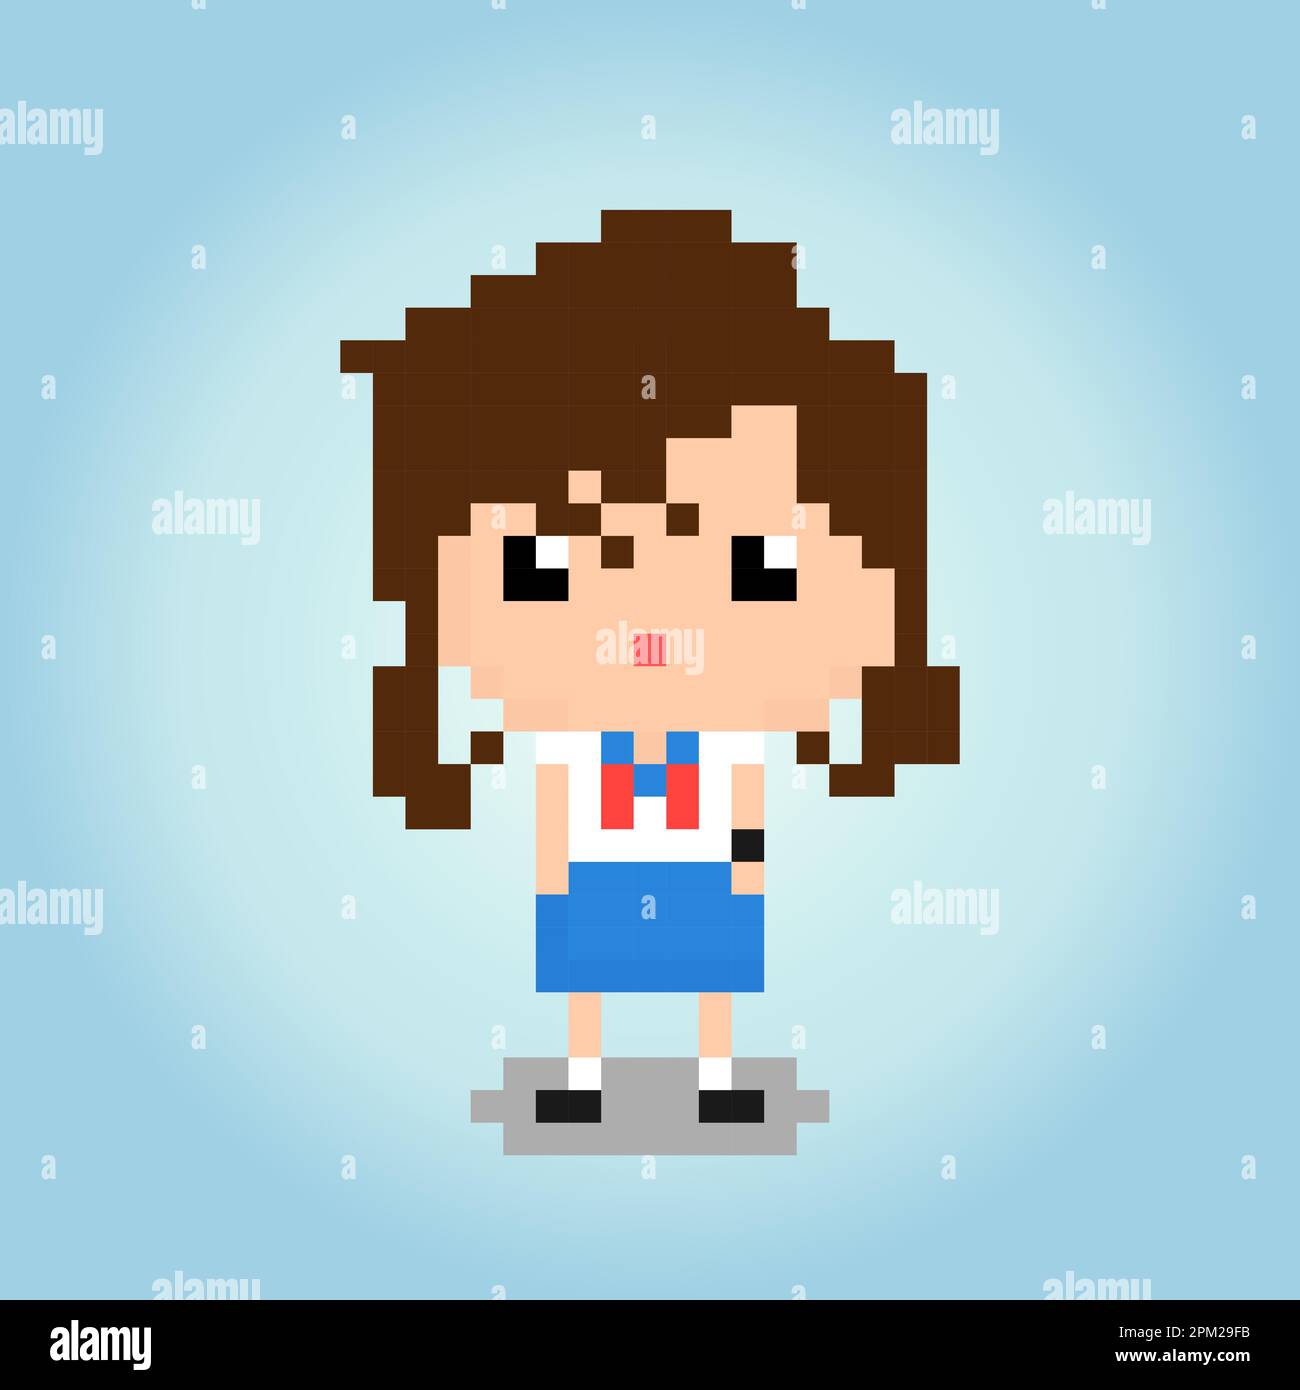 https://c8.alamy.com/comp/2PM29FB/8-bit-of-pixel-womens-character-pixel-school-girl-in-vector-illustrations-for-game-assets-or-cross-stitch-patterns-2PM29FB.jpg